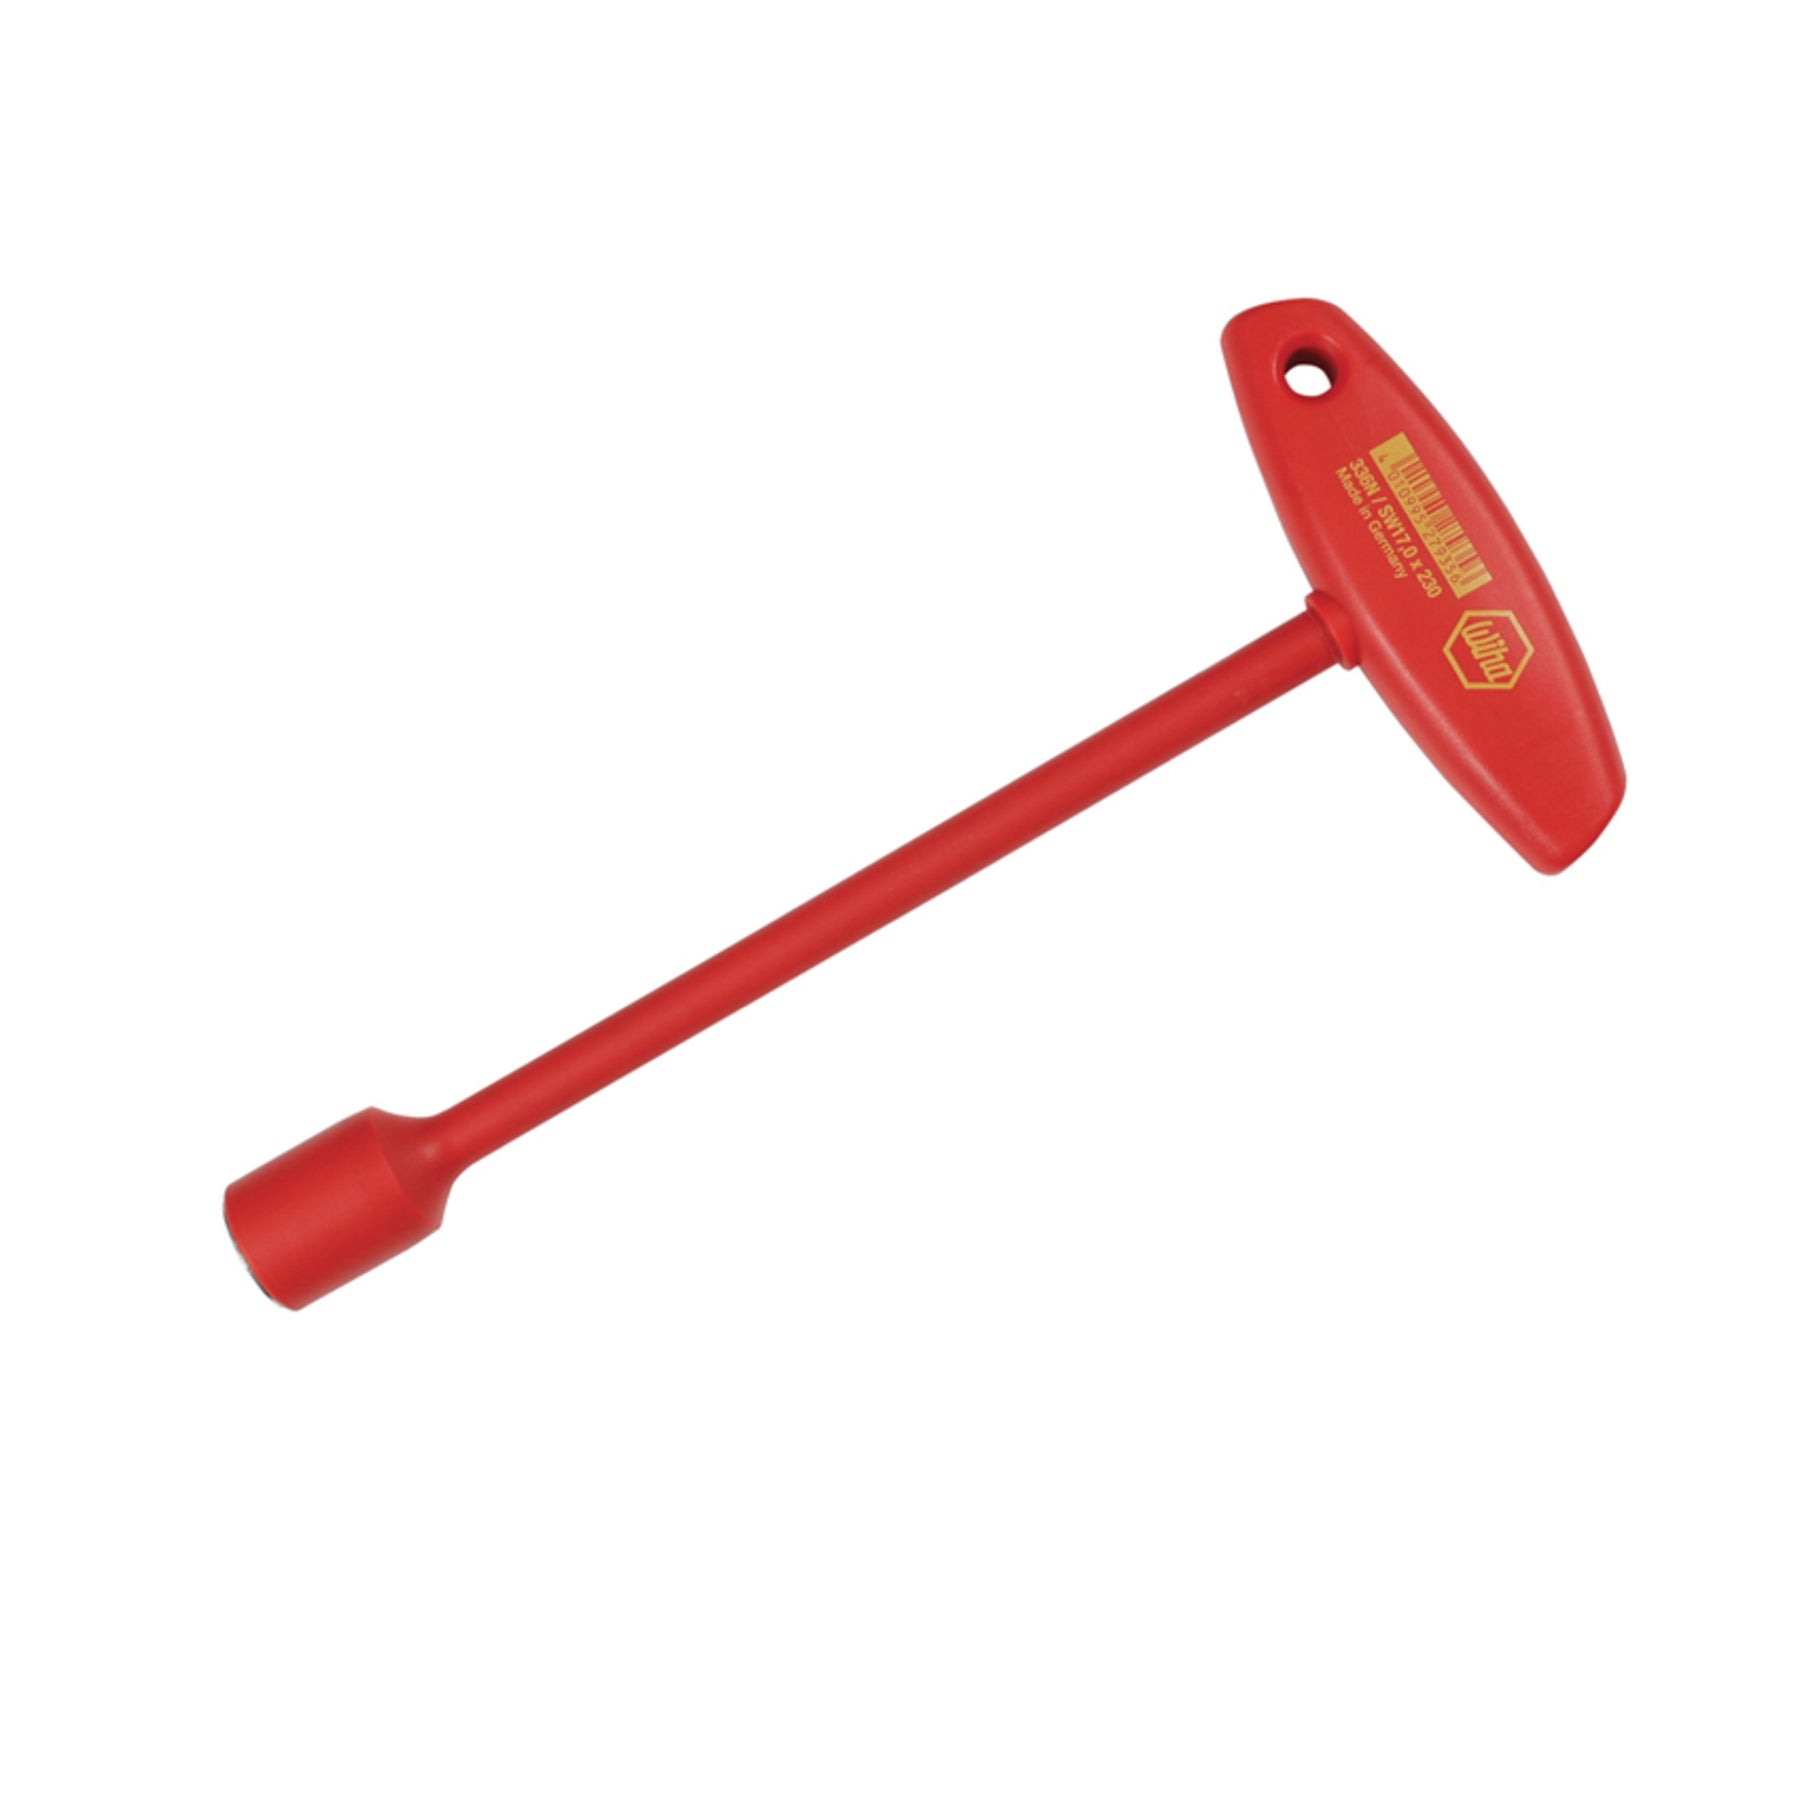 Wiha 33634 Insulated T-Handle Nut Driver 10.0mm